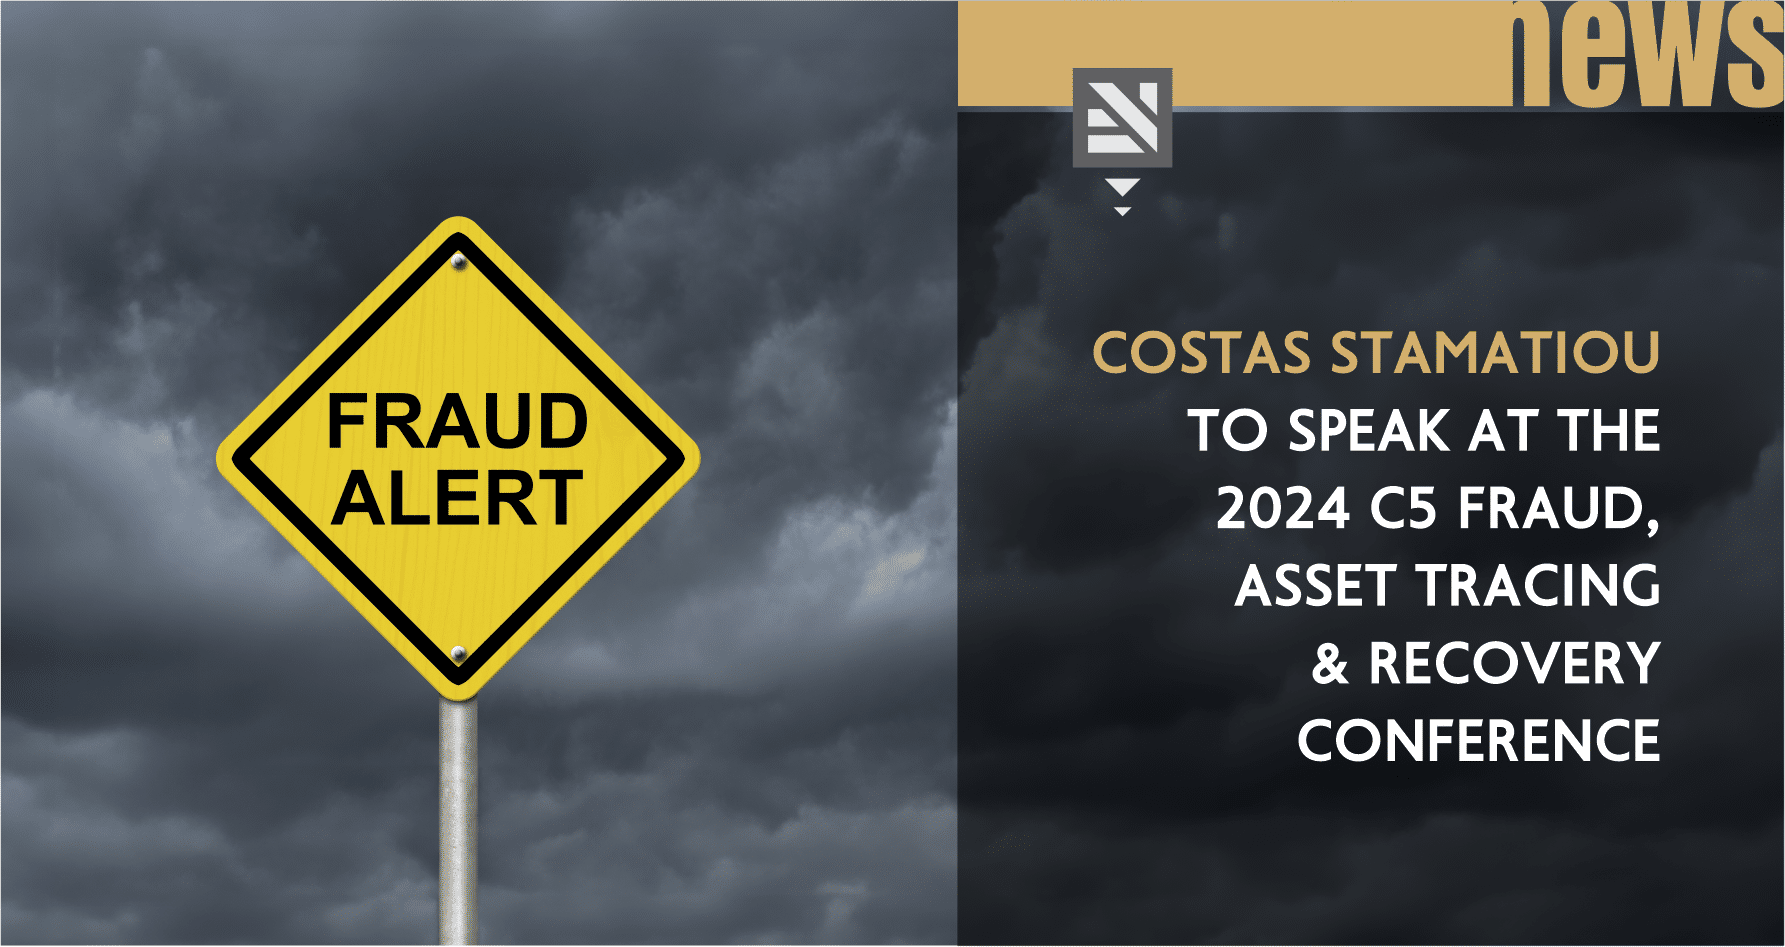 Costas Stamatiou to speak at the 2024 C5 Fraud, Asset Tracing & Recovery Conference